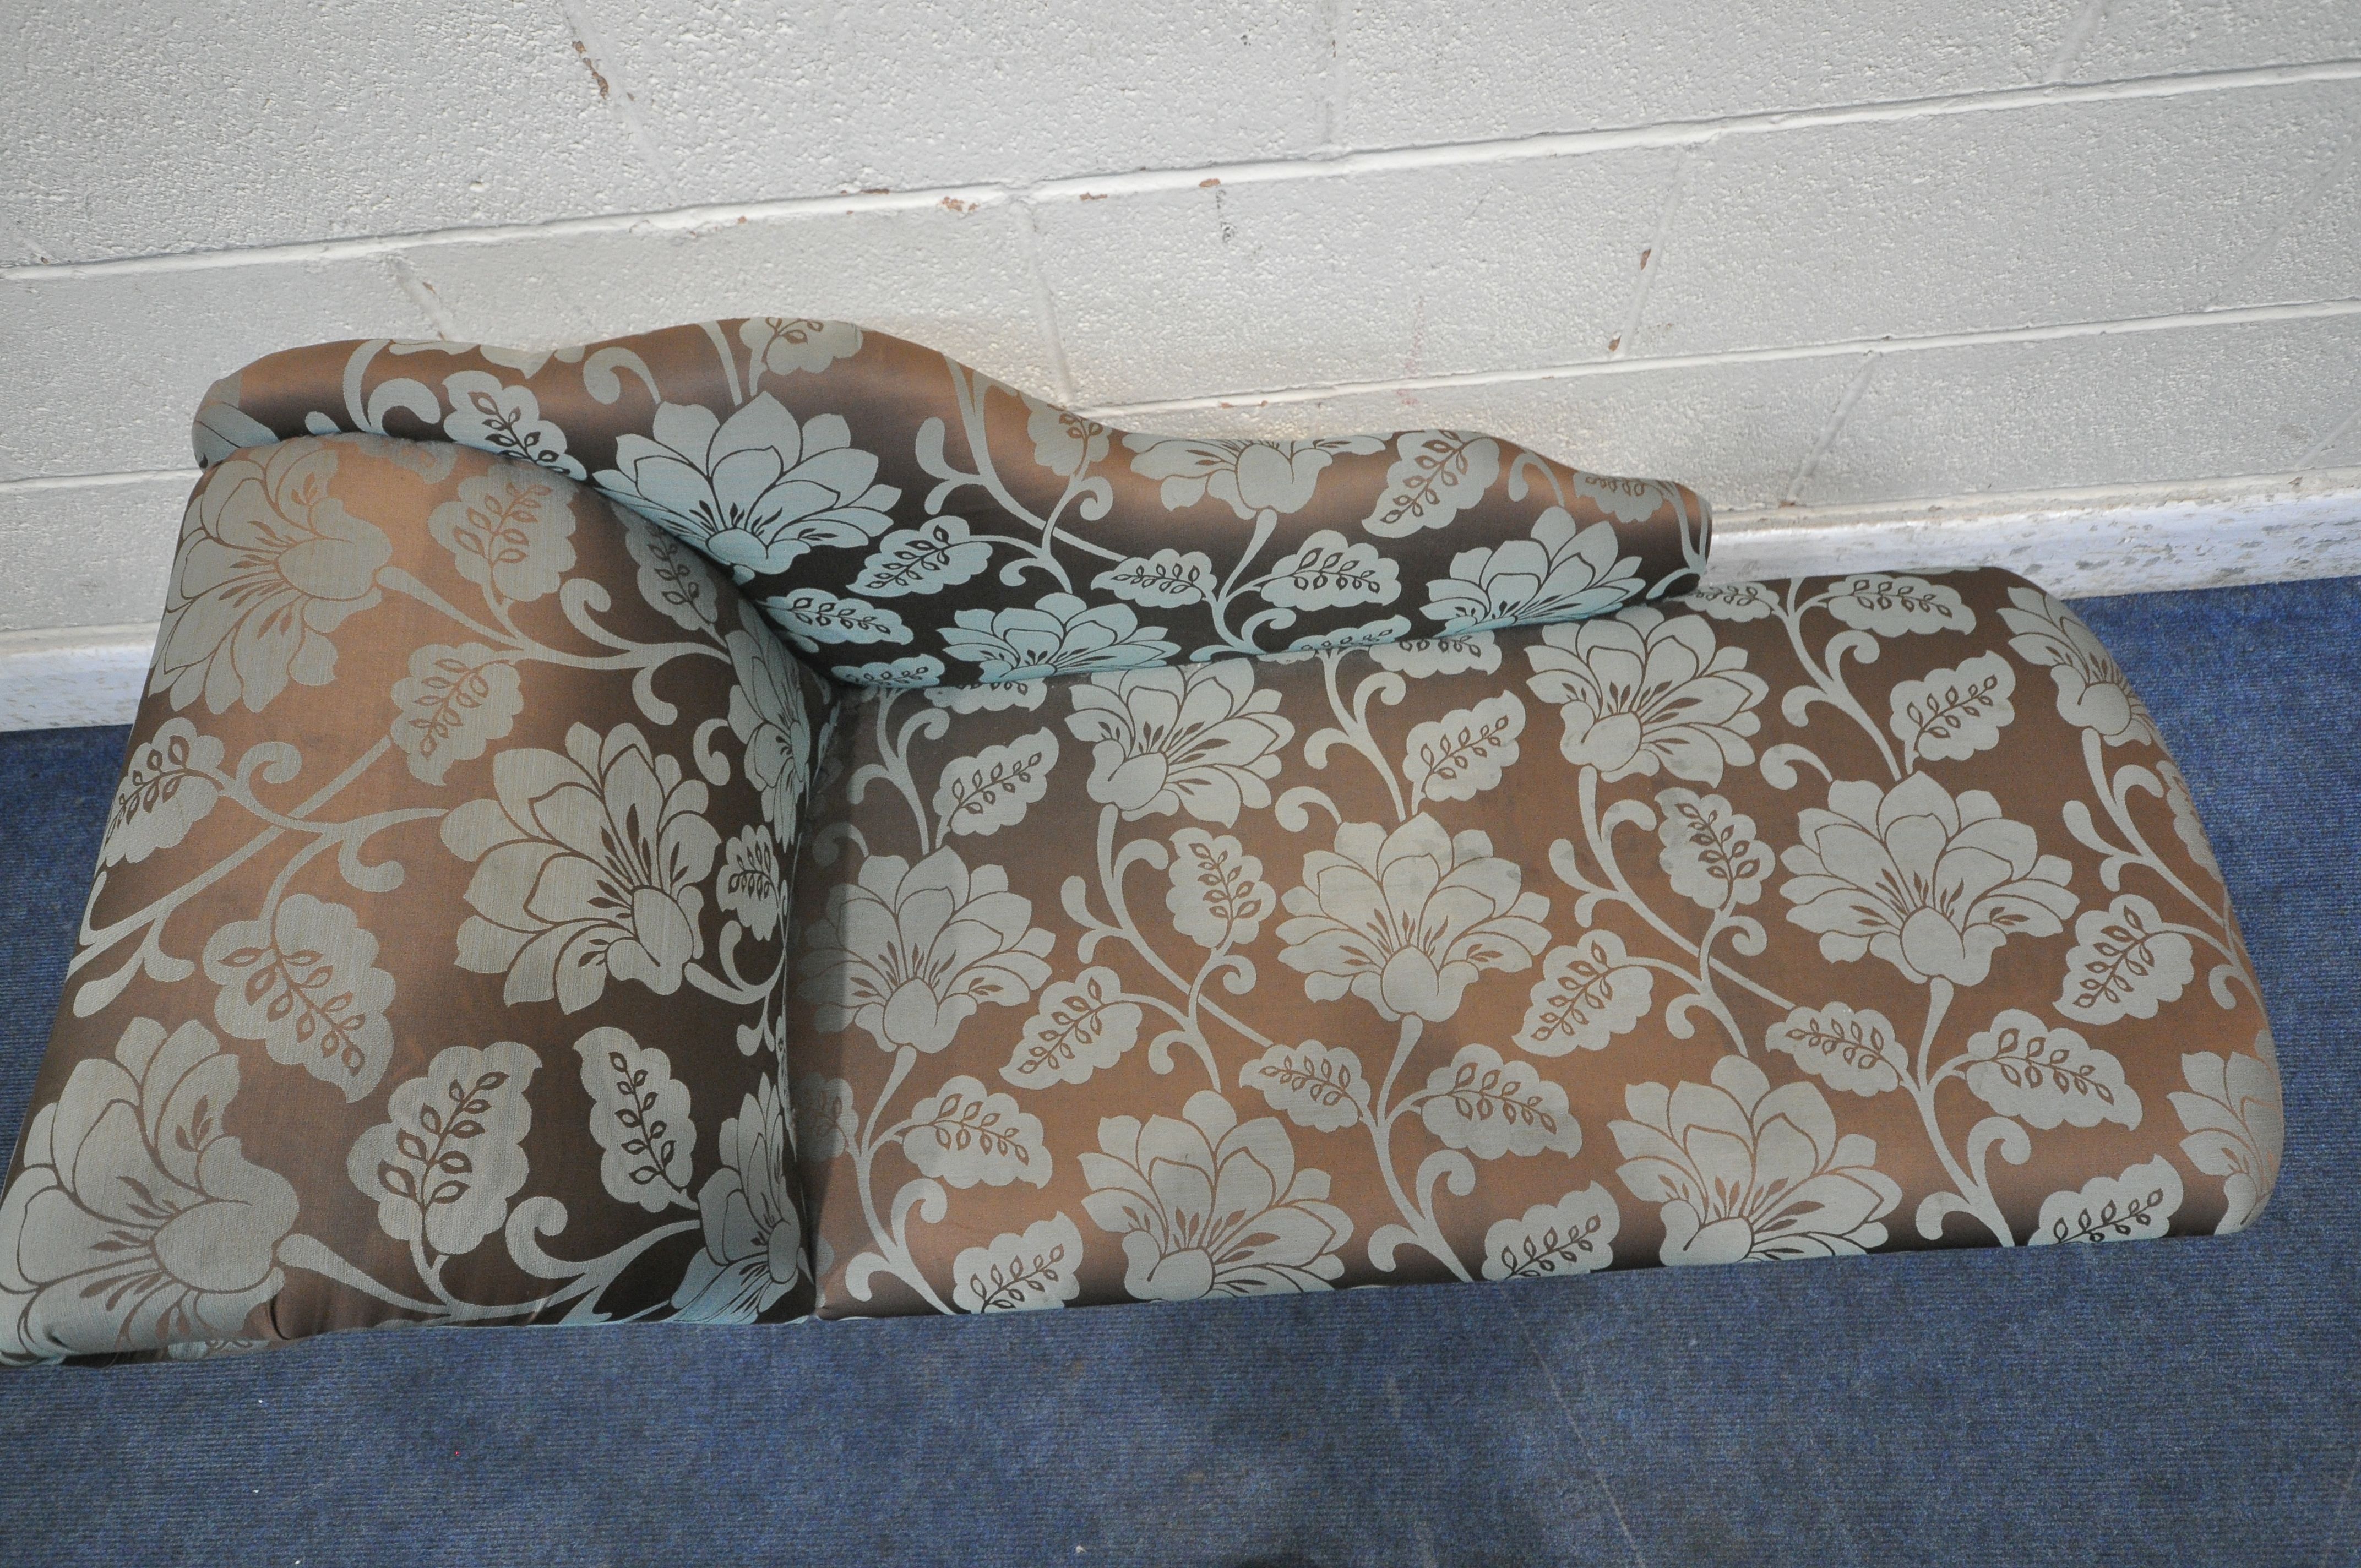 A MODERN CHAISE LOUNGE, with foliate upholstery (condition report: some discoloration) - Image 2 of 2